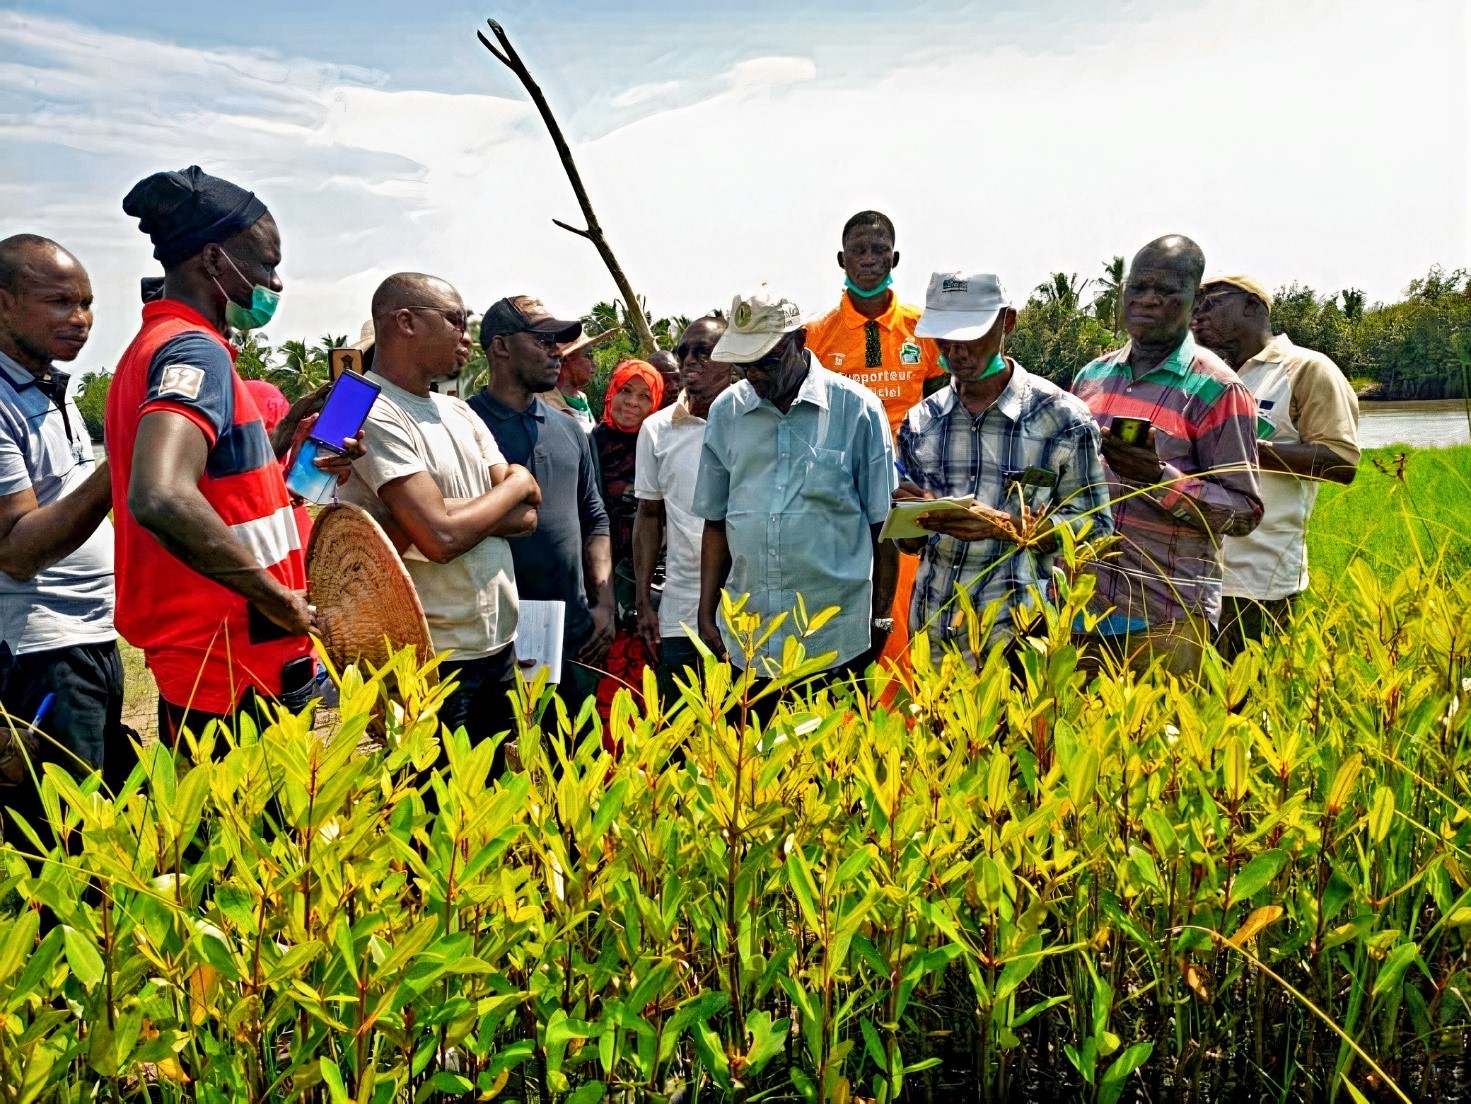 Visit to a tree nursery by students of the Professional Master's degree in Climate Change and Sustainable Development